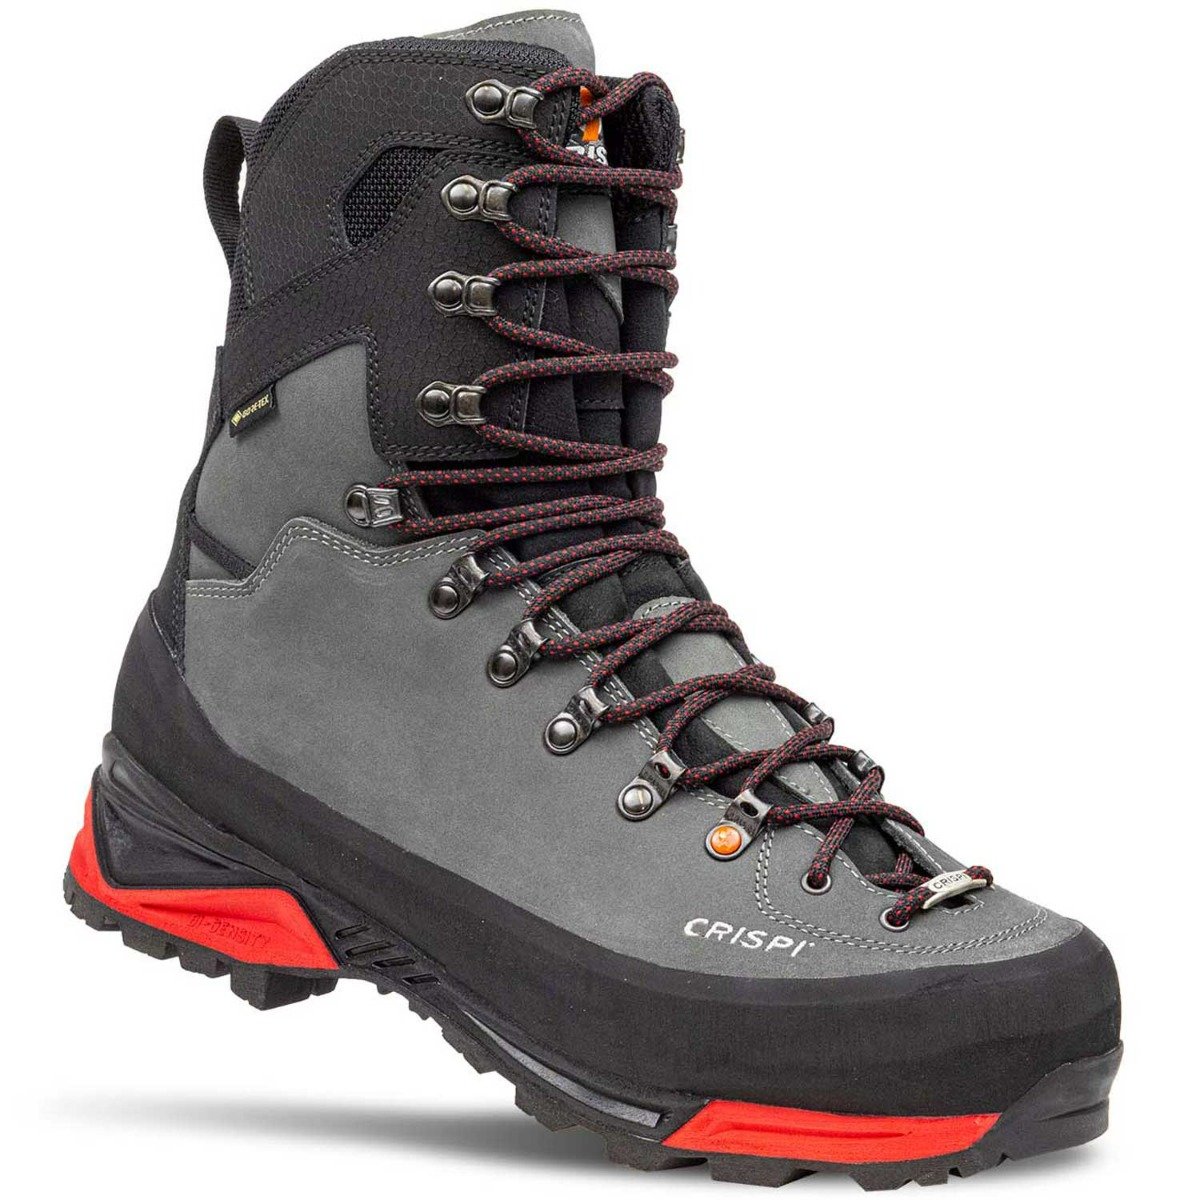 Crispi Briksdal PRO SF GTX Insulated Hunting Boots